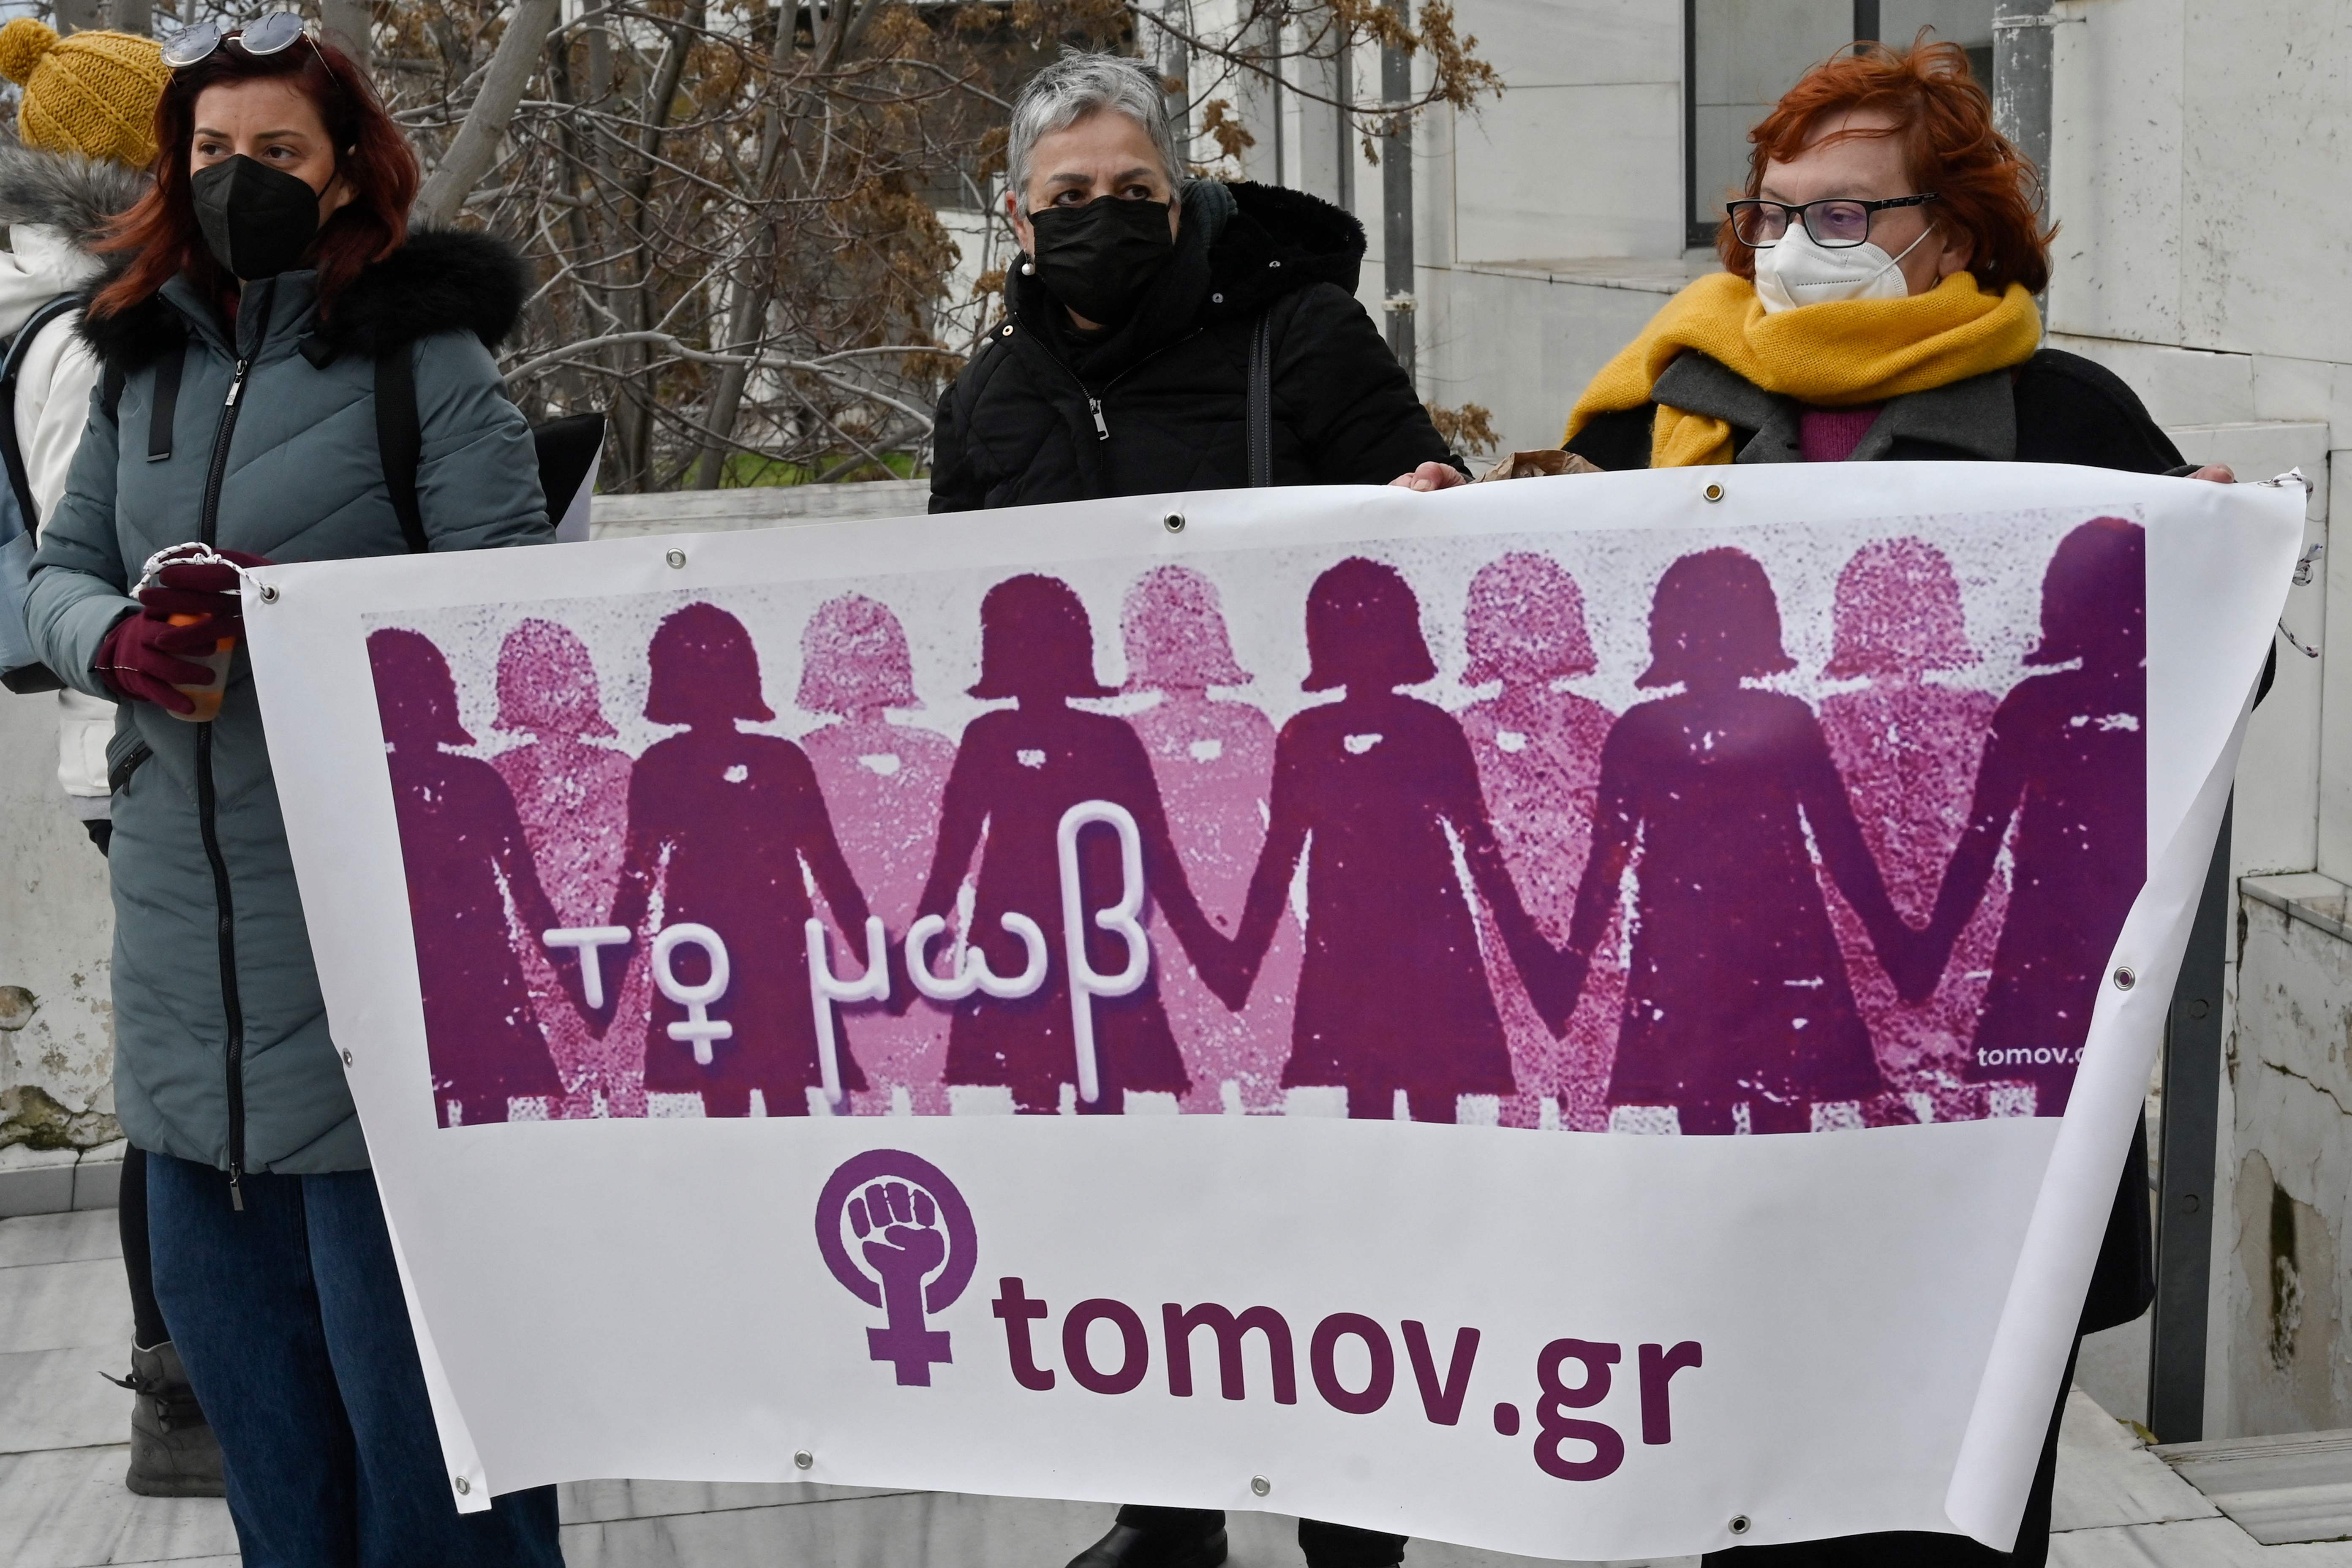 Feminist organisations hold a banner outside a court in Athens, Greece, 12 January 2022